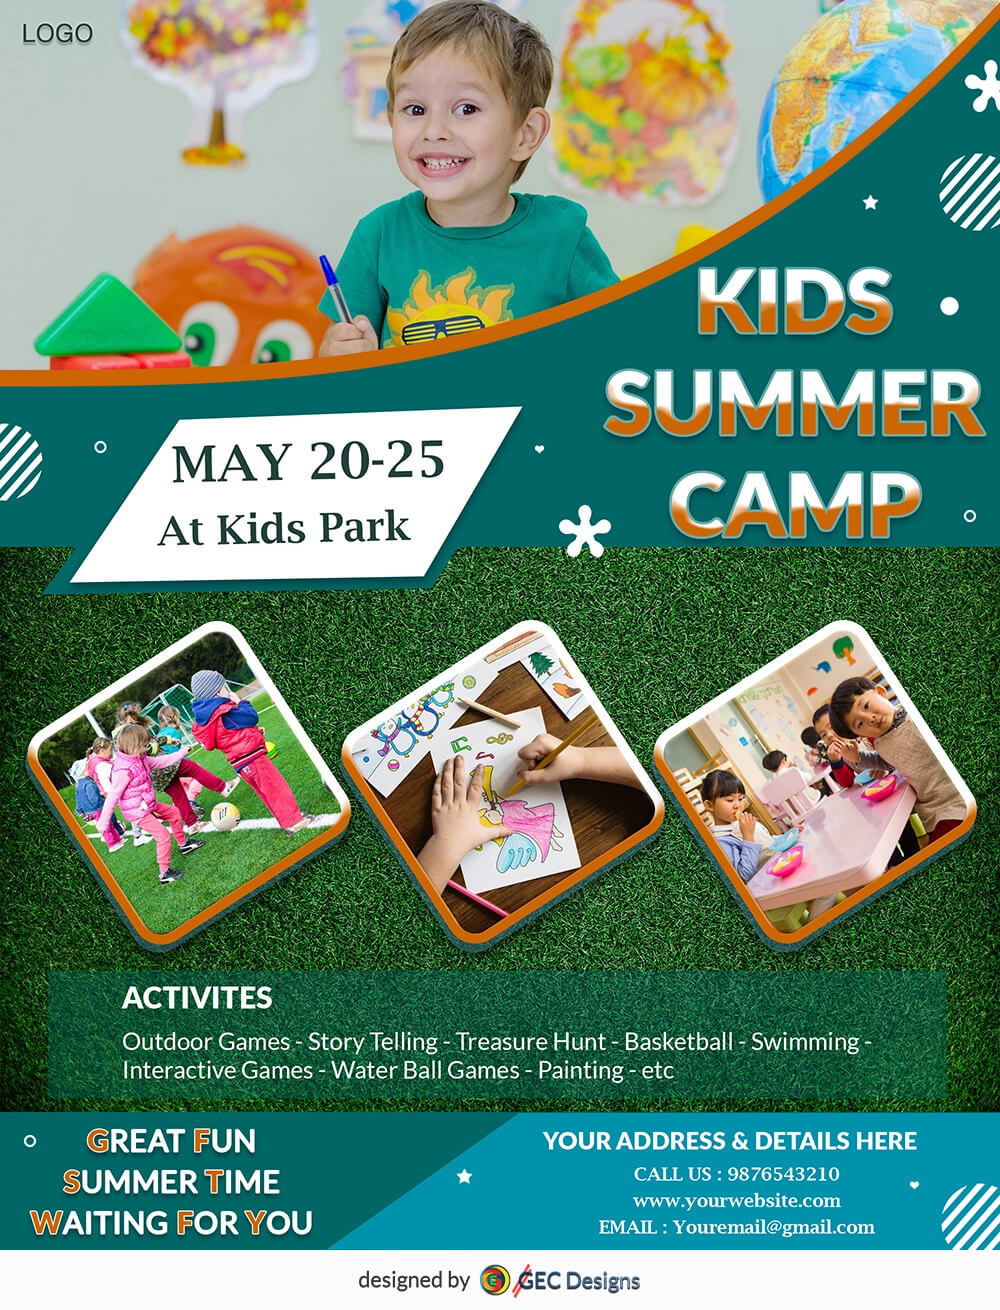 Download Free Great Fun Kids Summer Camp Flyer Design Templates With Summer Camp Brochure Template Free Download